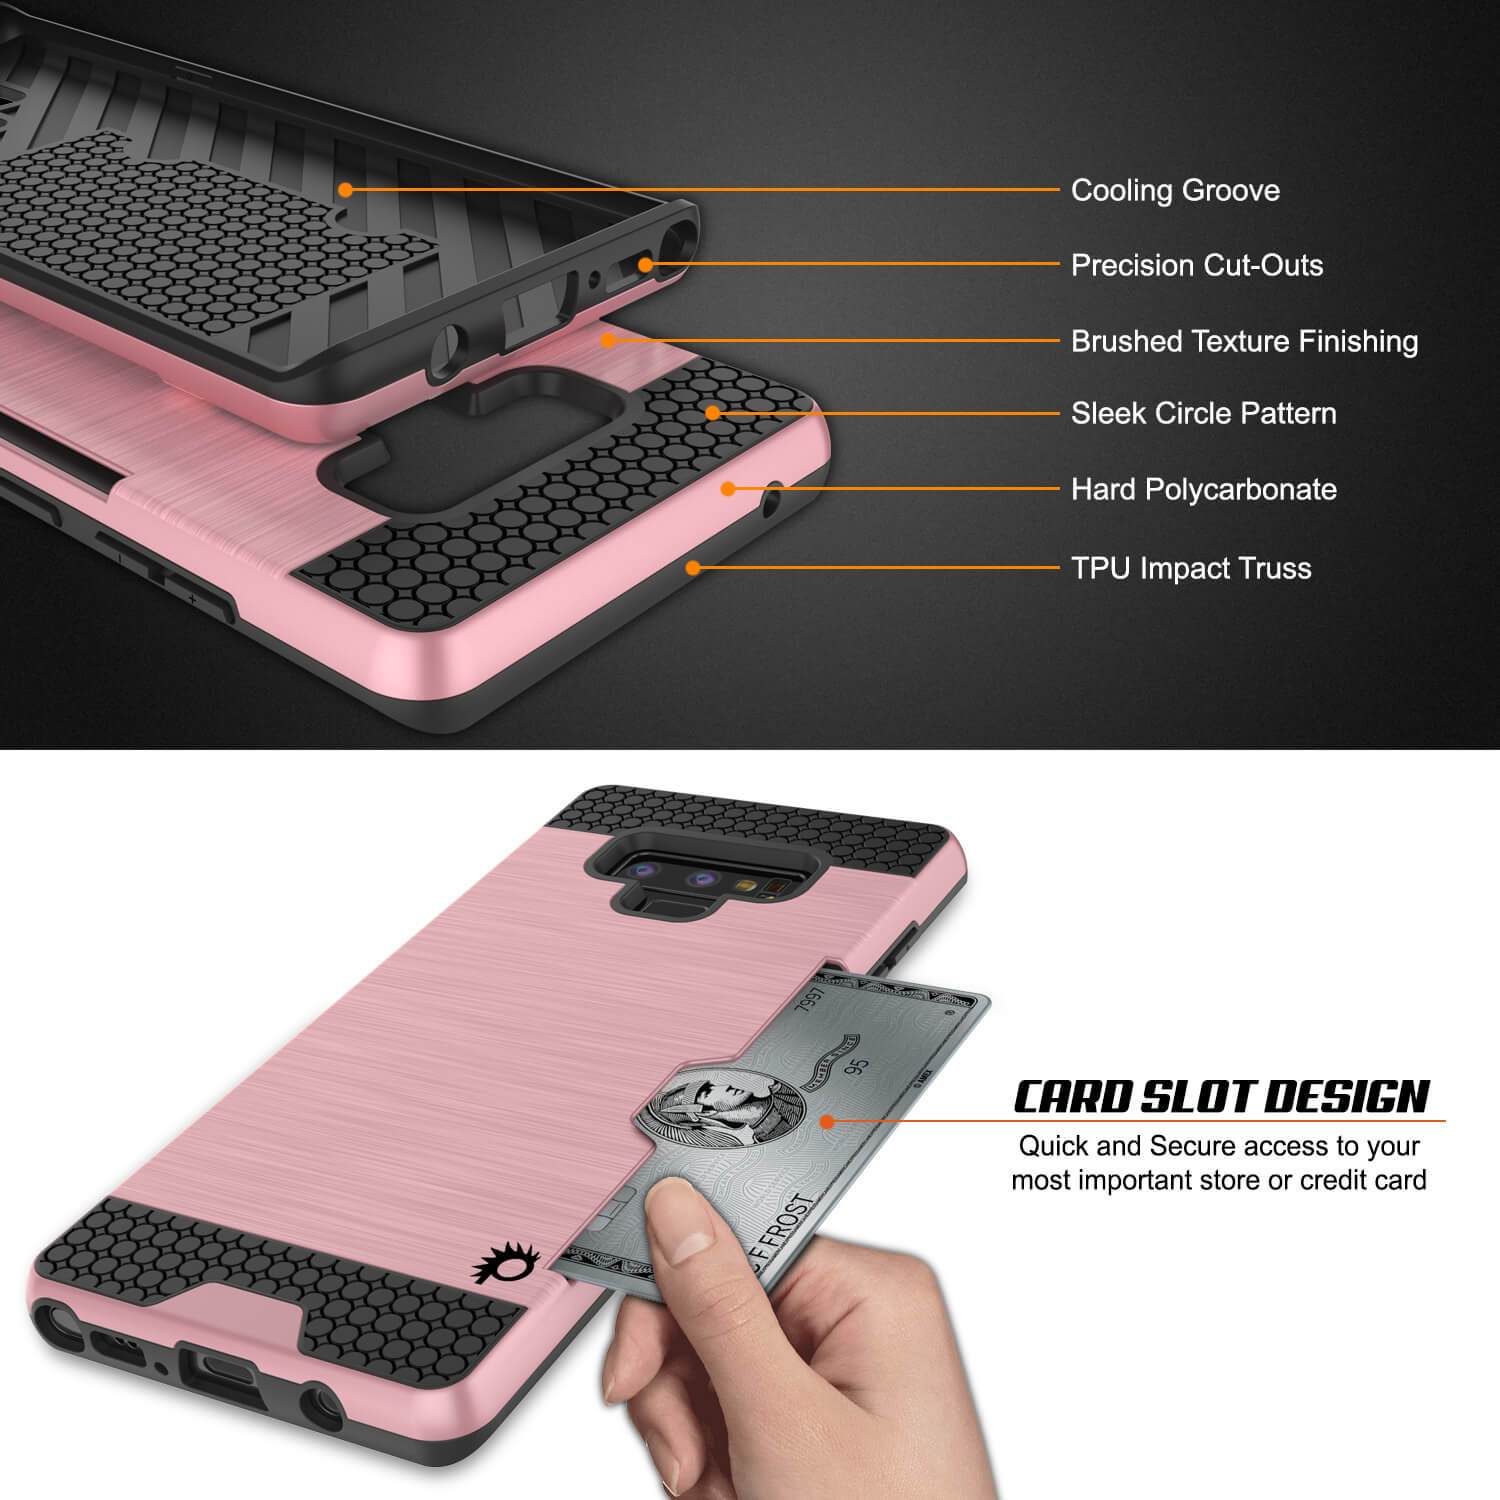 Galaxy Note 9 Case, PUNKcase [SLOT Series] Slim Fit  Samsung Note 9 [Rose Gold]